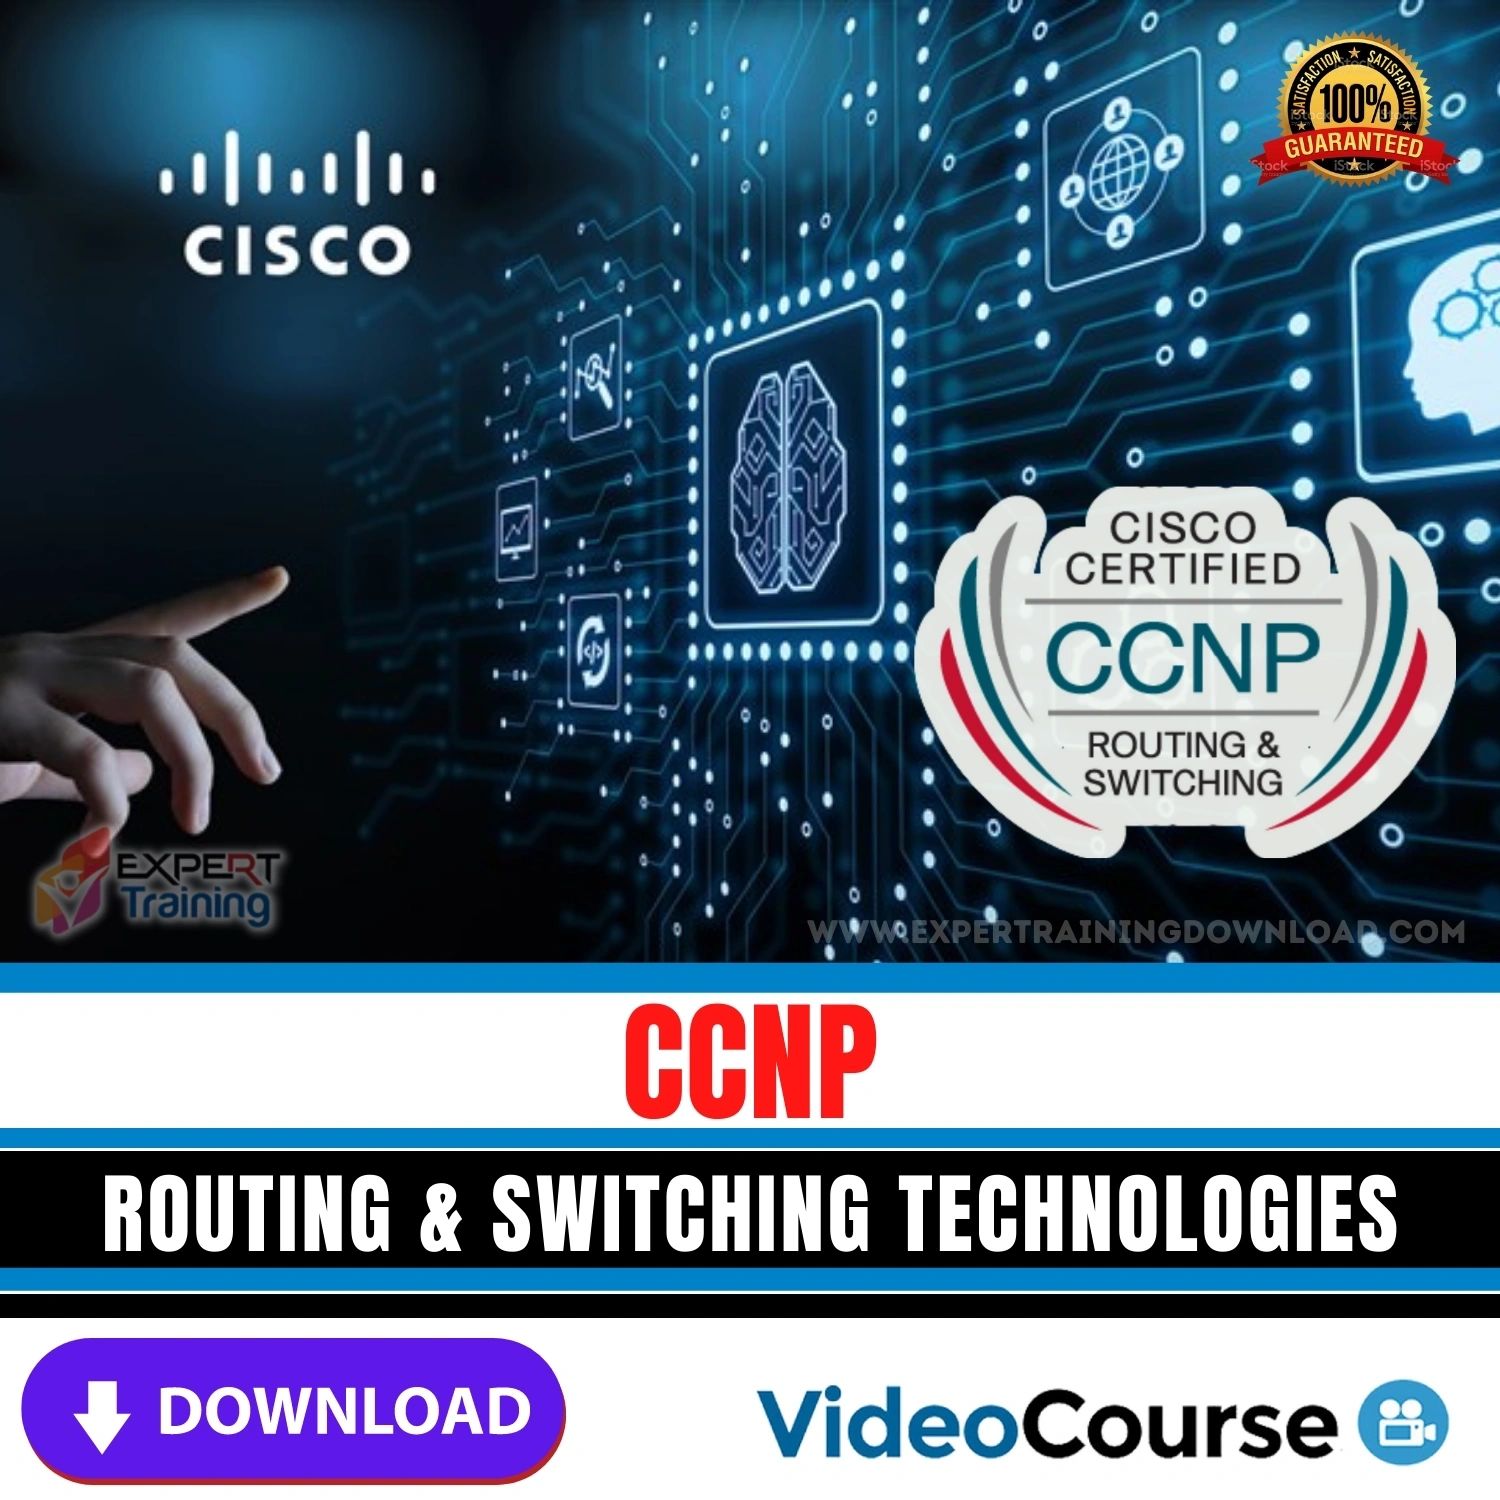 CCNP Routing & Switching Technologies